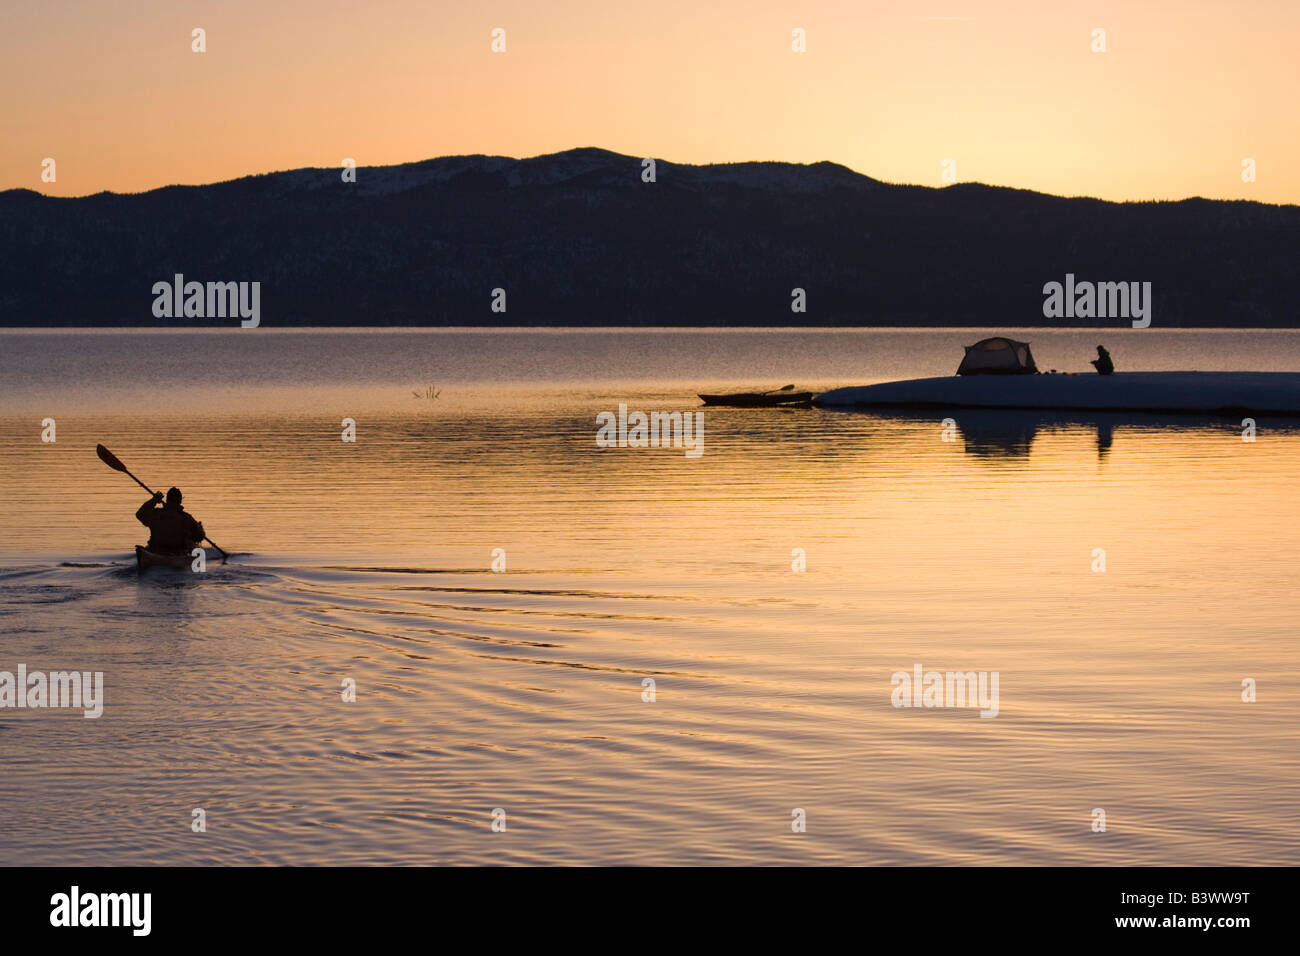 Silhouette of a man kayaking in a lake with a woman near a tent in the background, Lake Tahoe, California, USA Stock Photo